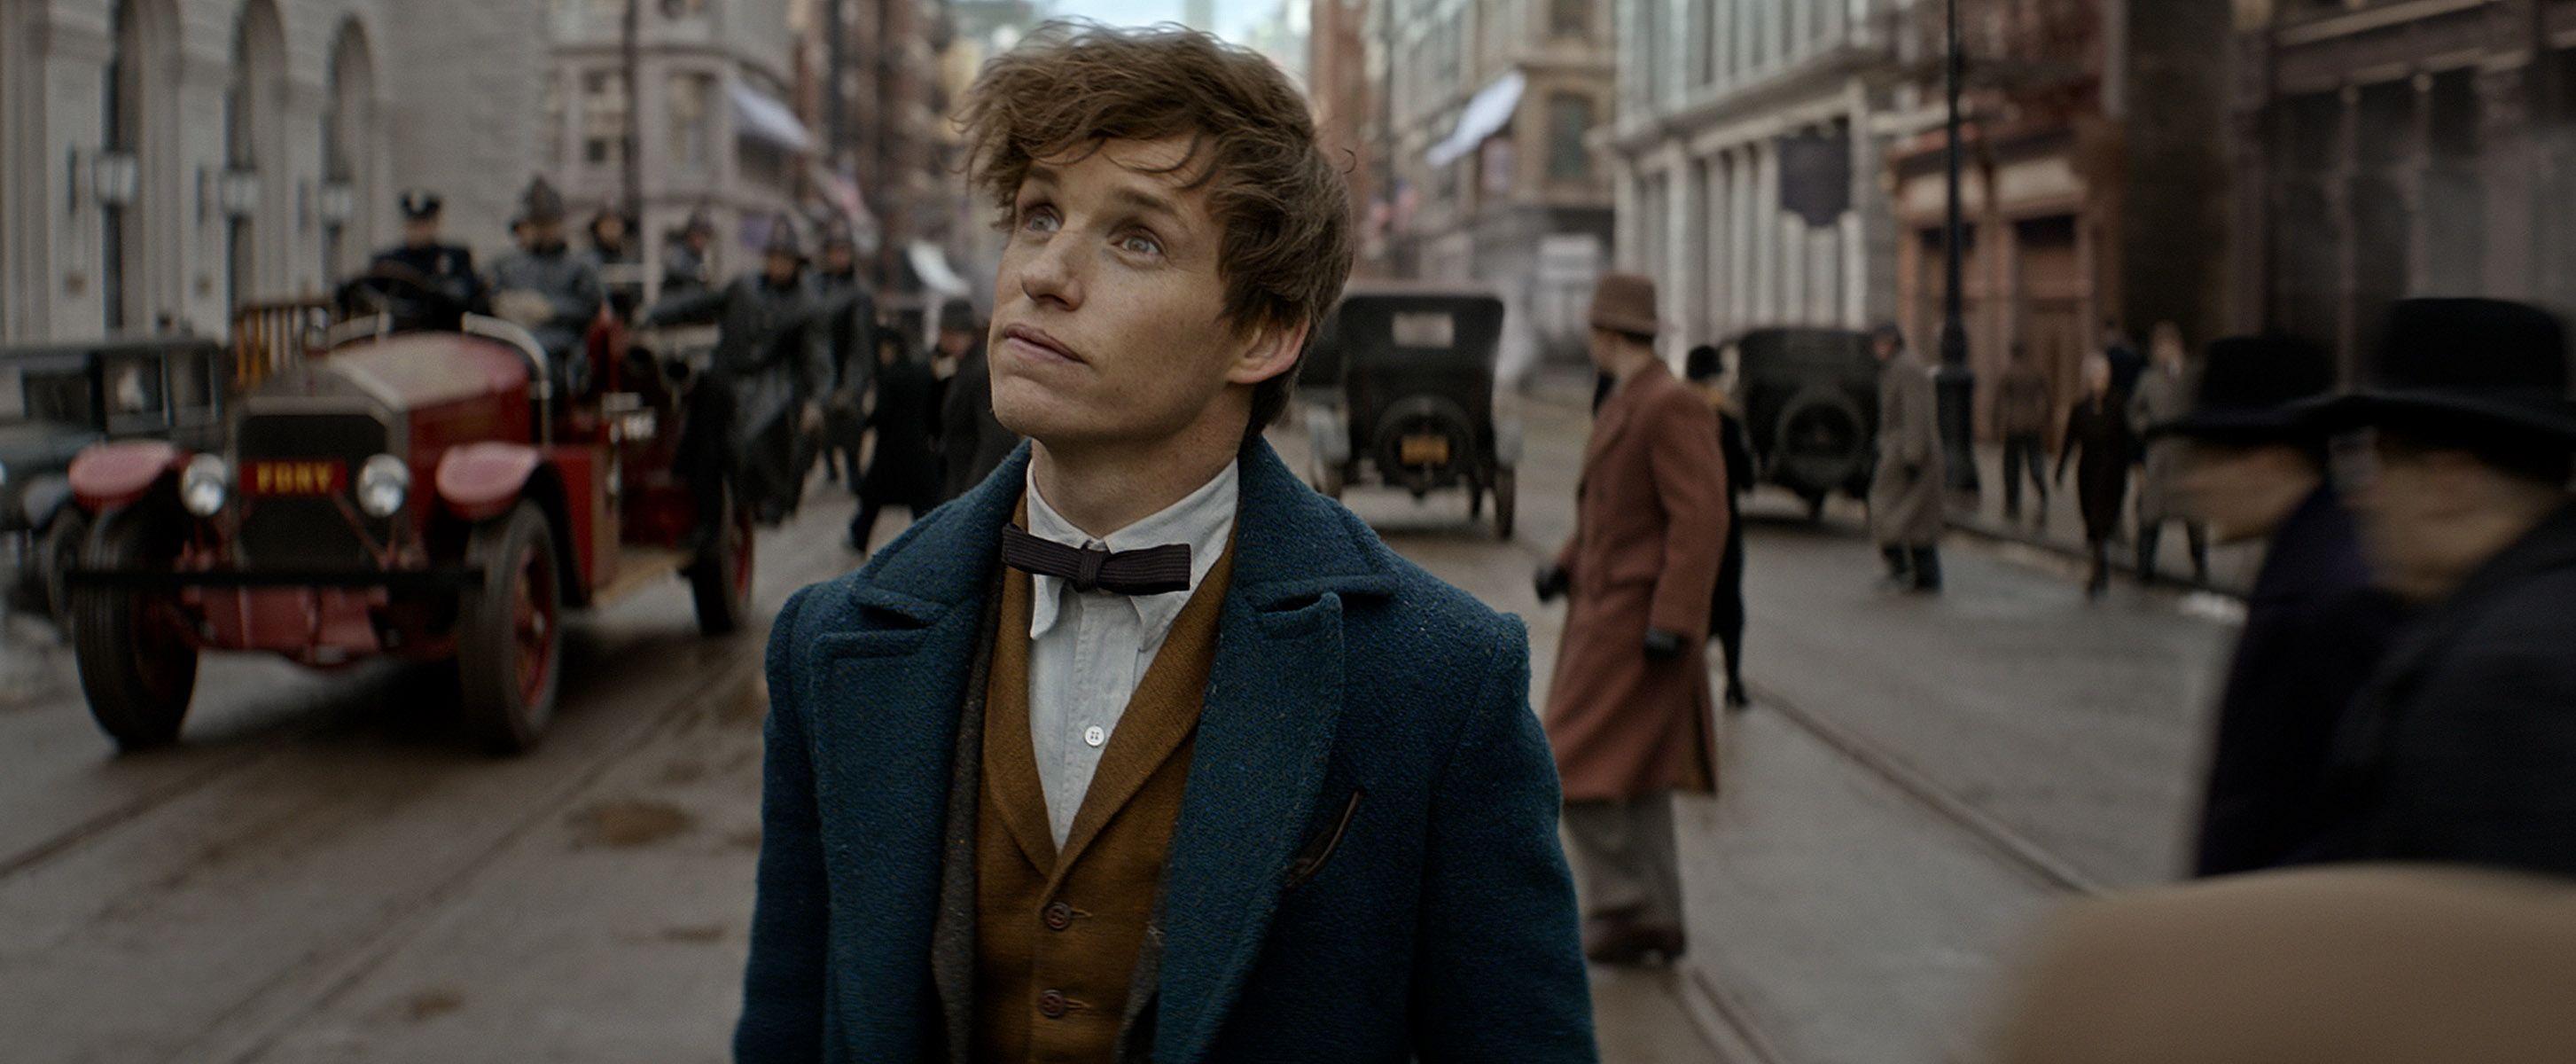 Fantastic Beasts and Where to Find Them: 43 Things to Know